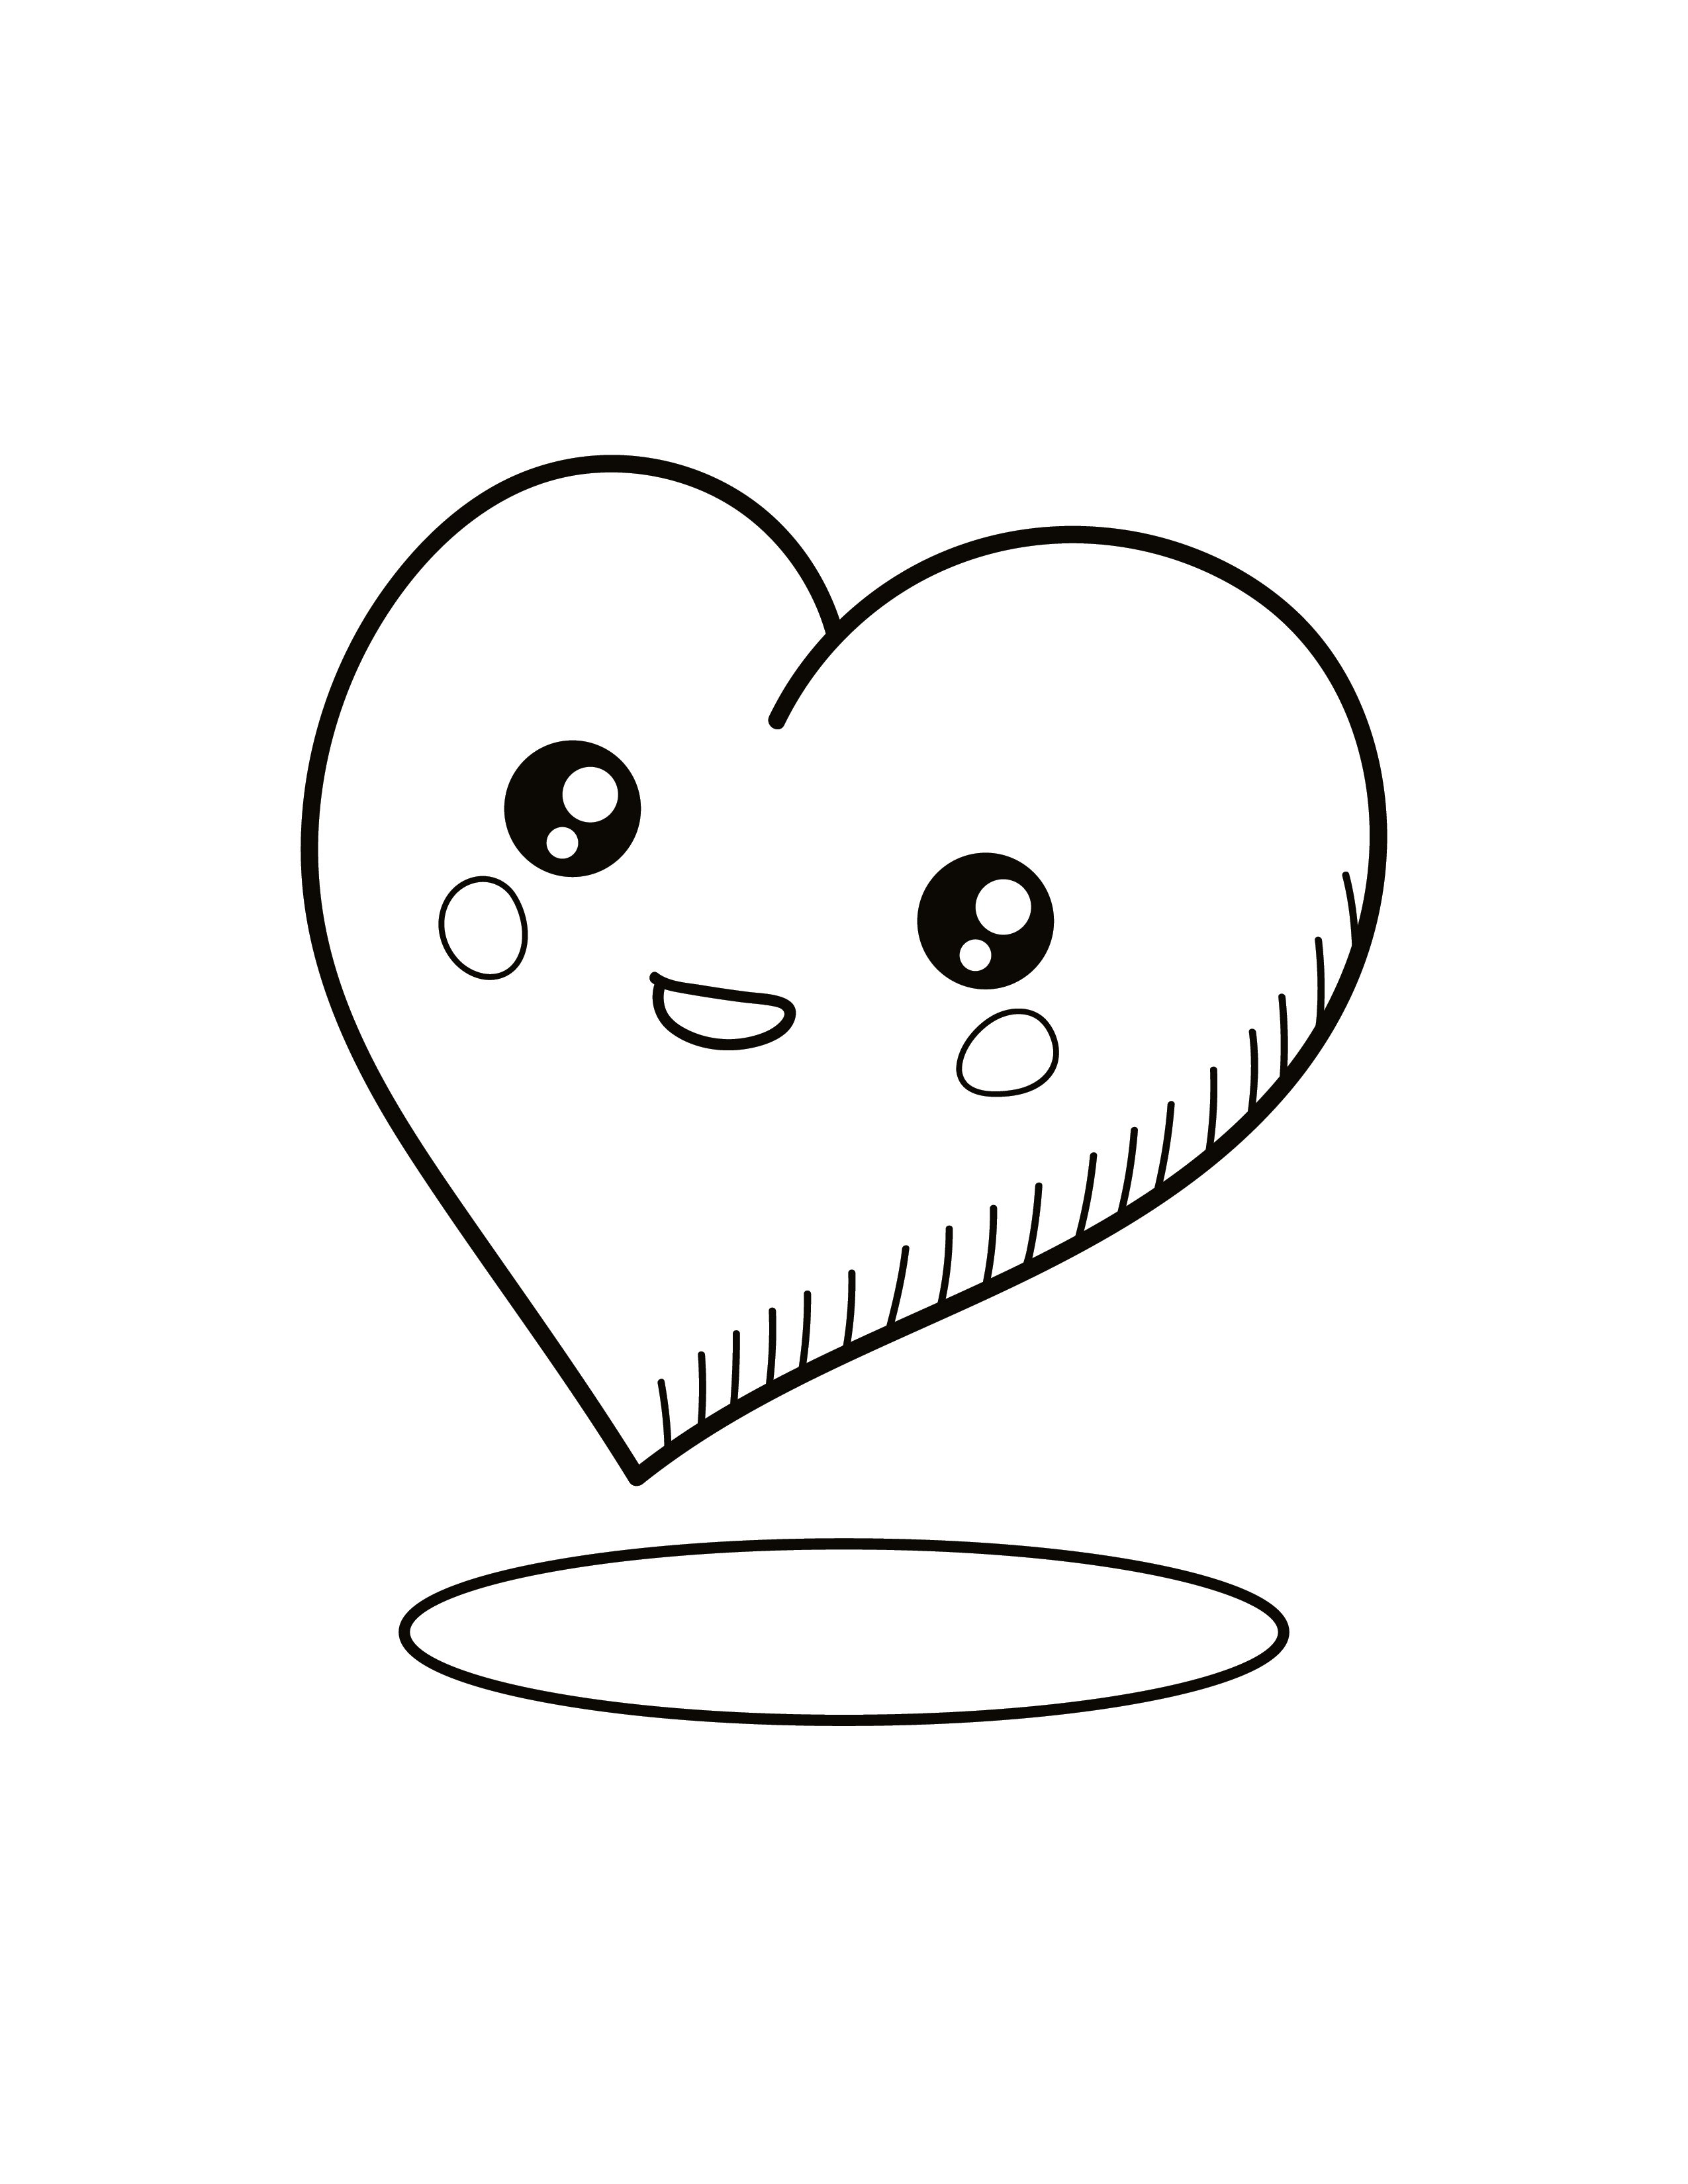 Free Cute Heart Coloring Page - Eps, Illustrator, Jpg, Png, Pdf, Svg